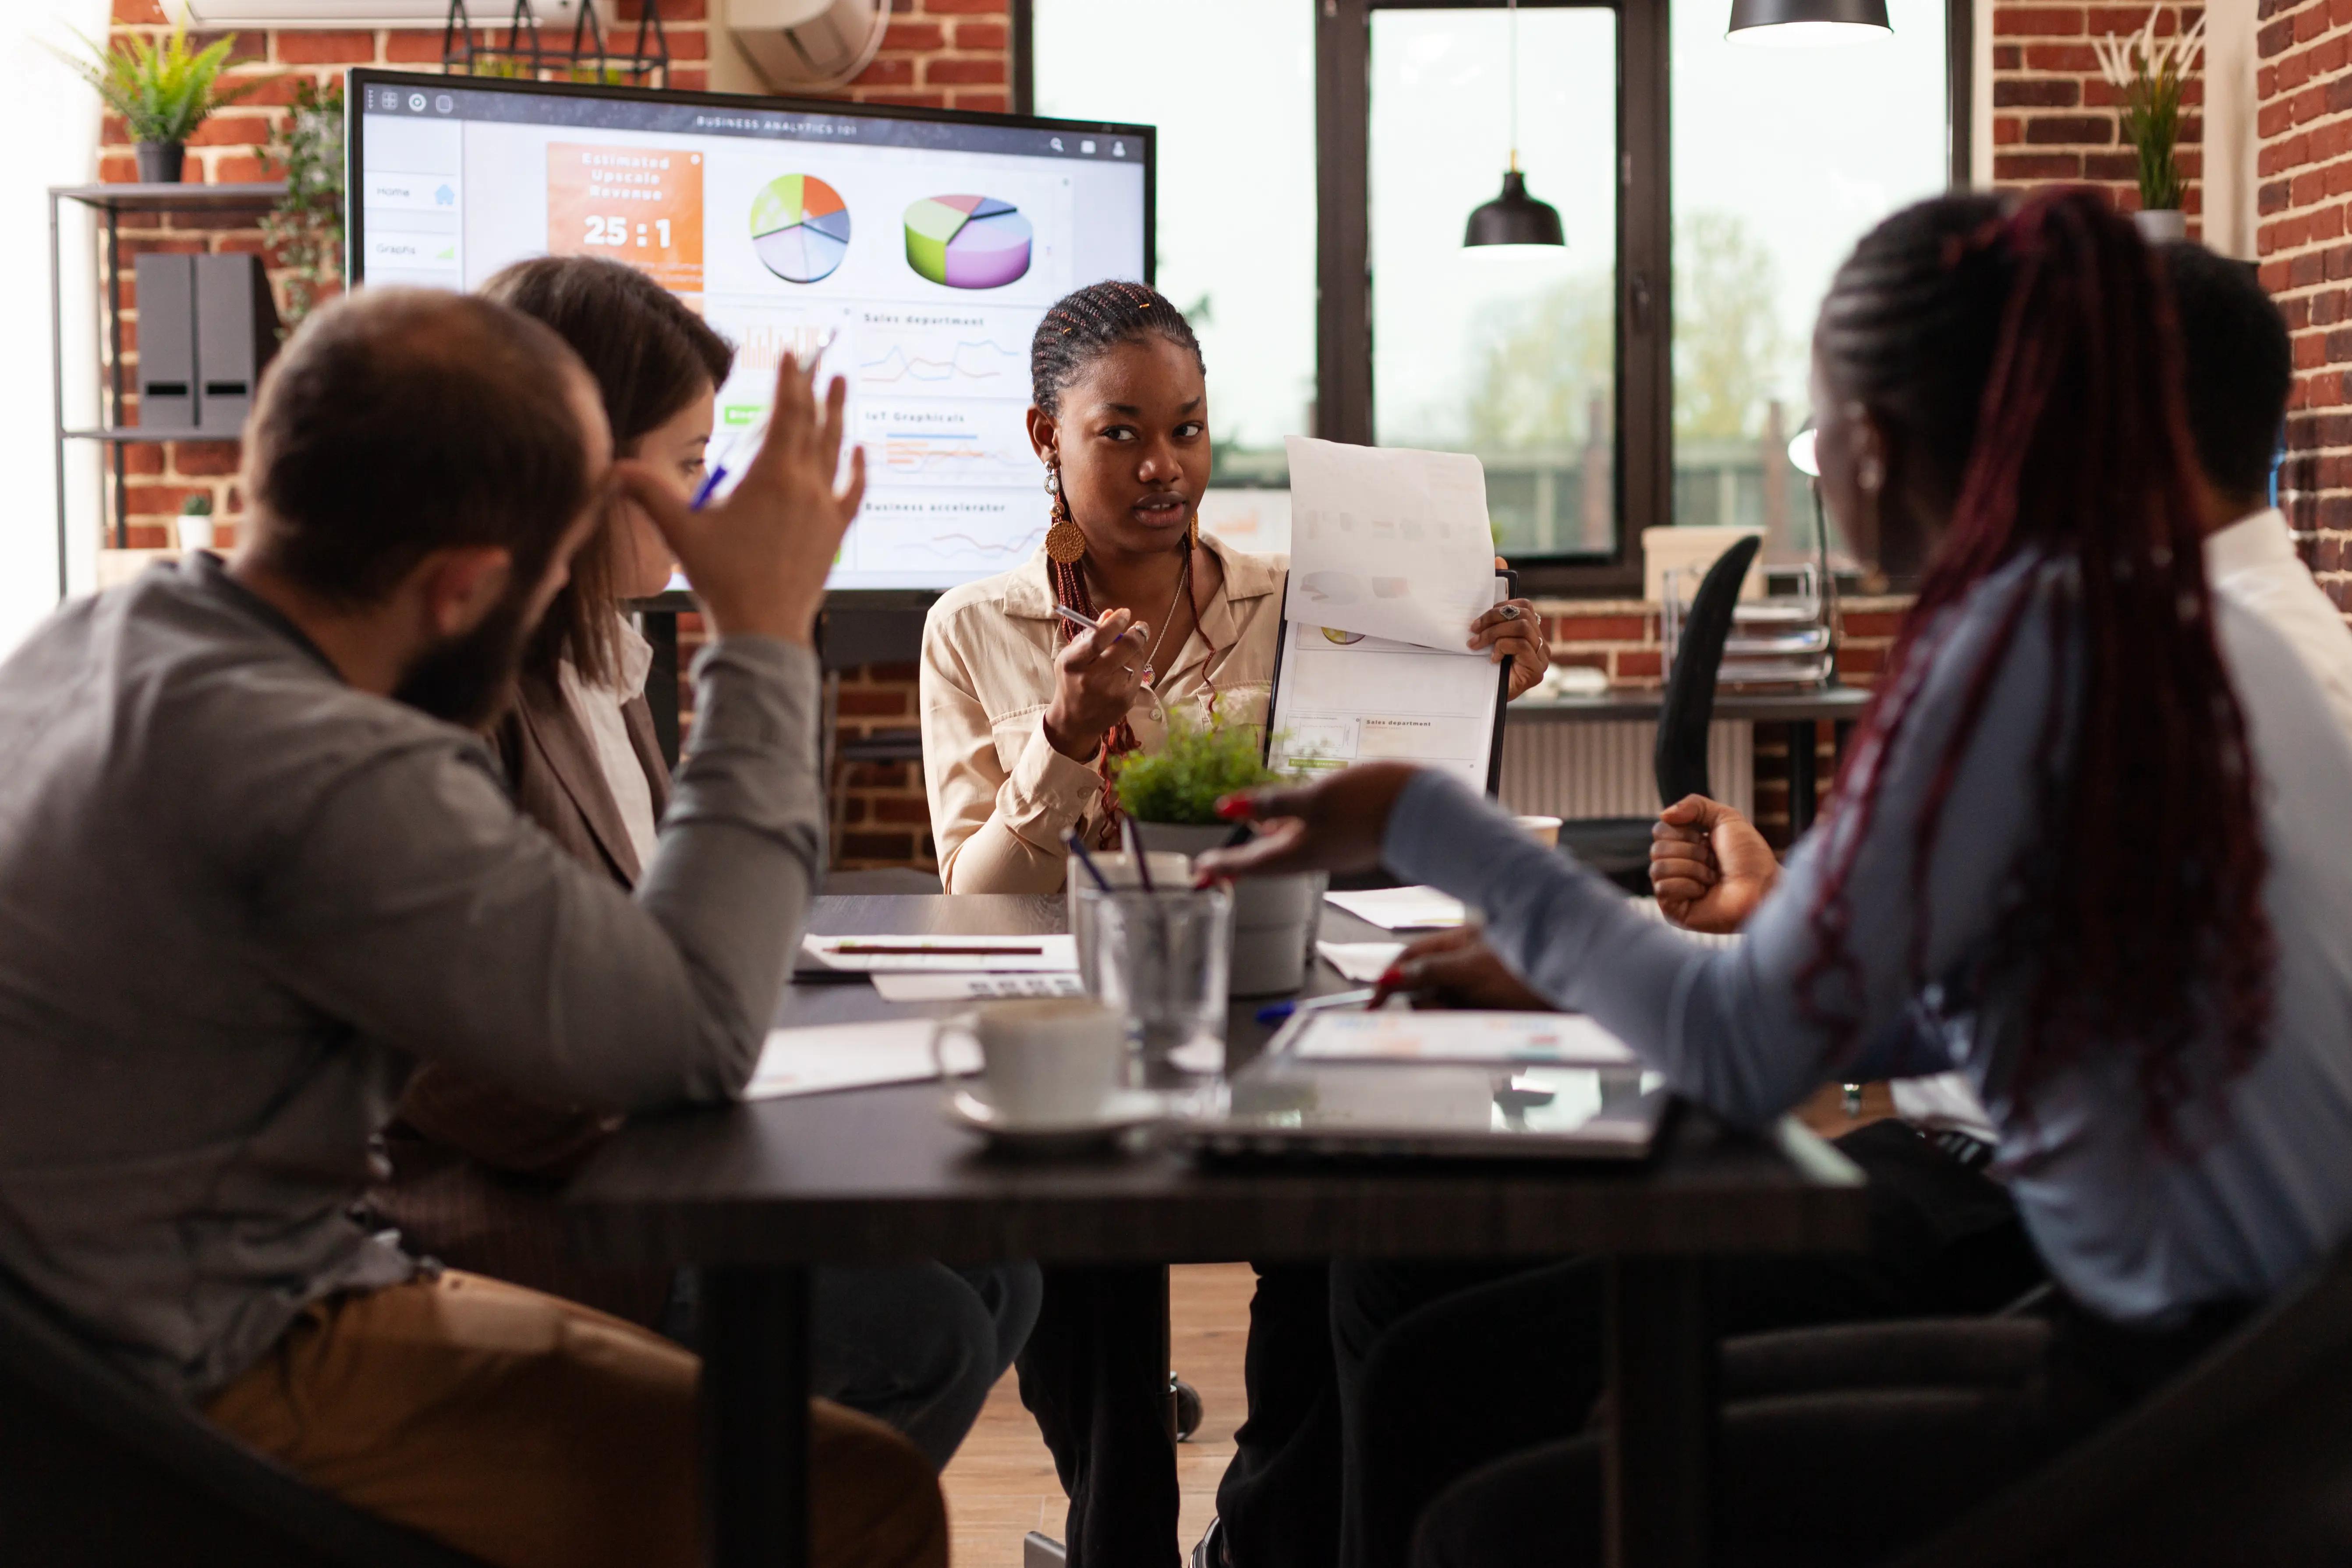 A diverse business team is engaged in a lively discussion over documents and a presentation with analytics and pie charts on a screen, in a modern brick-walled office.